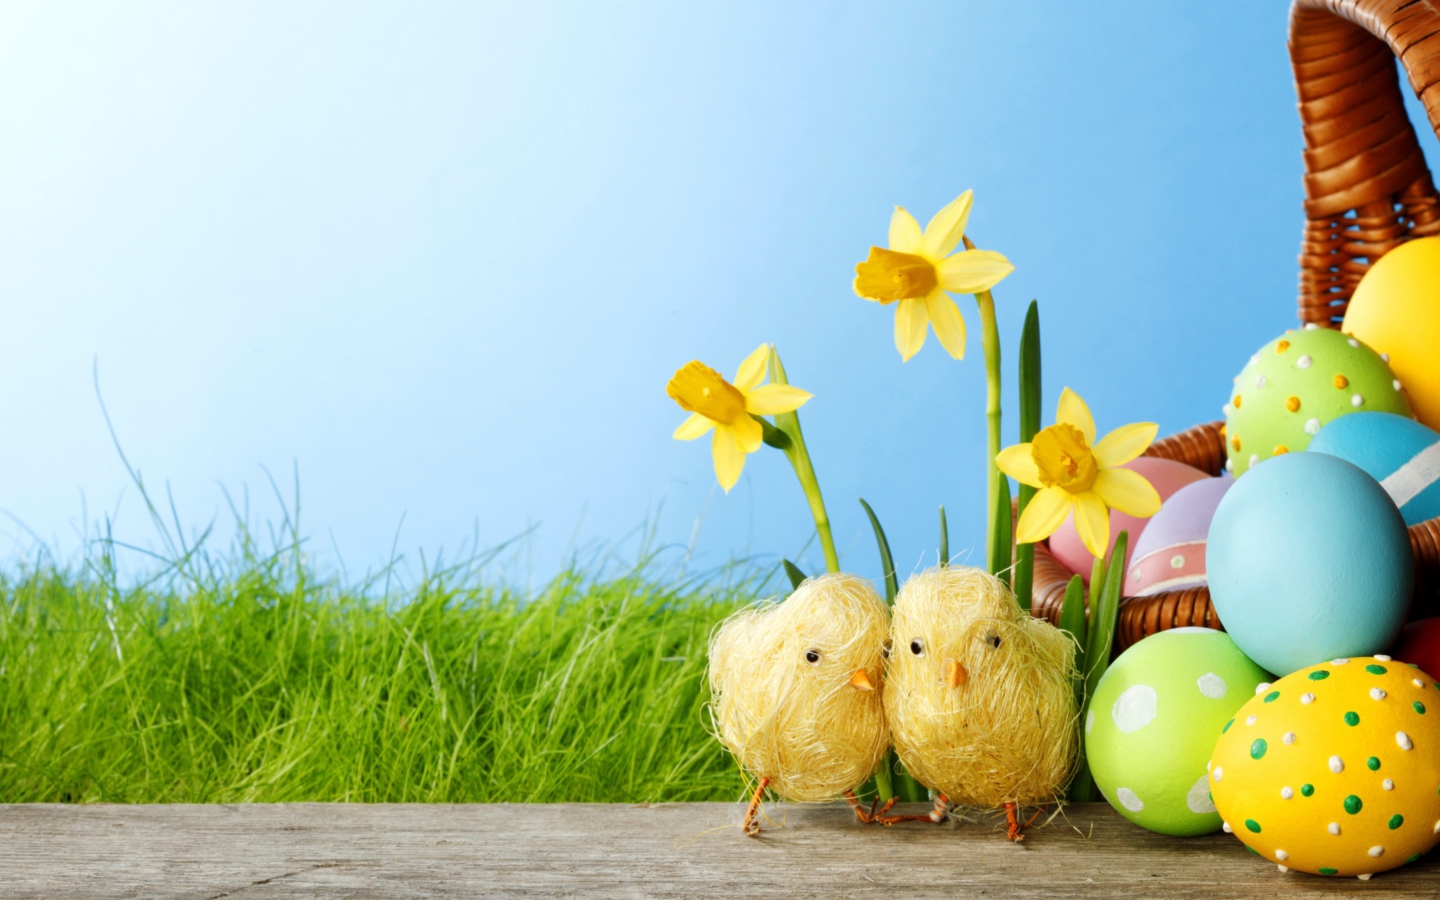 Yellow Easter Chickens wallpaper 1440x900